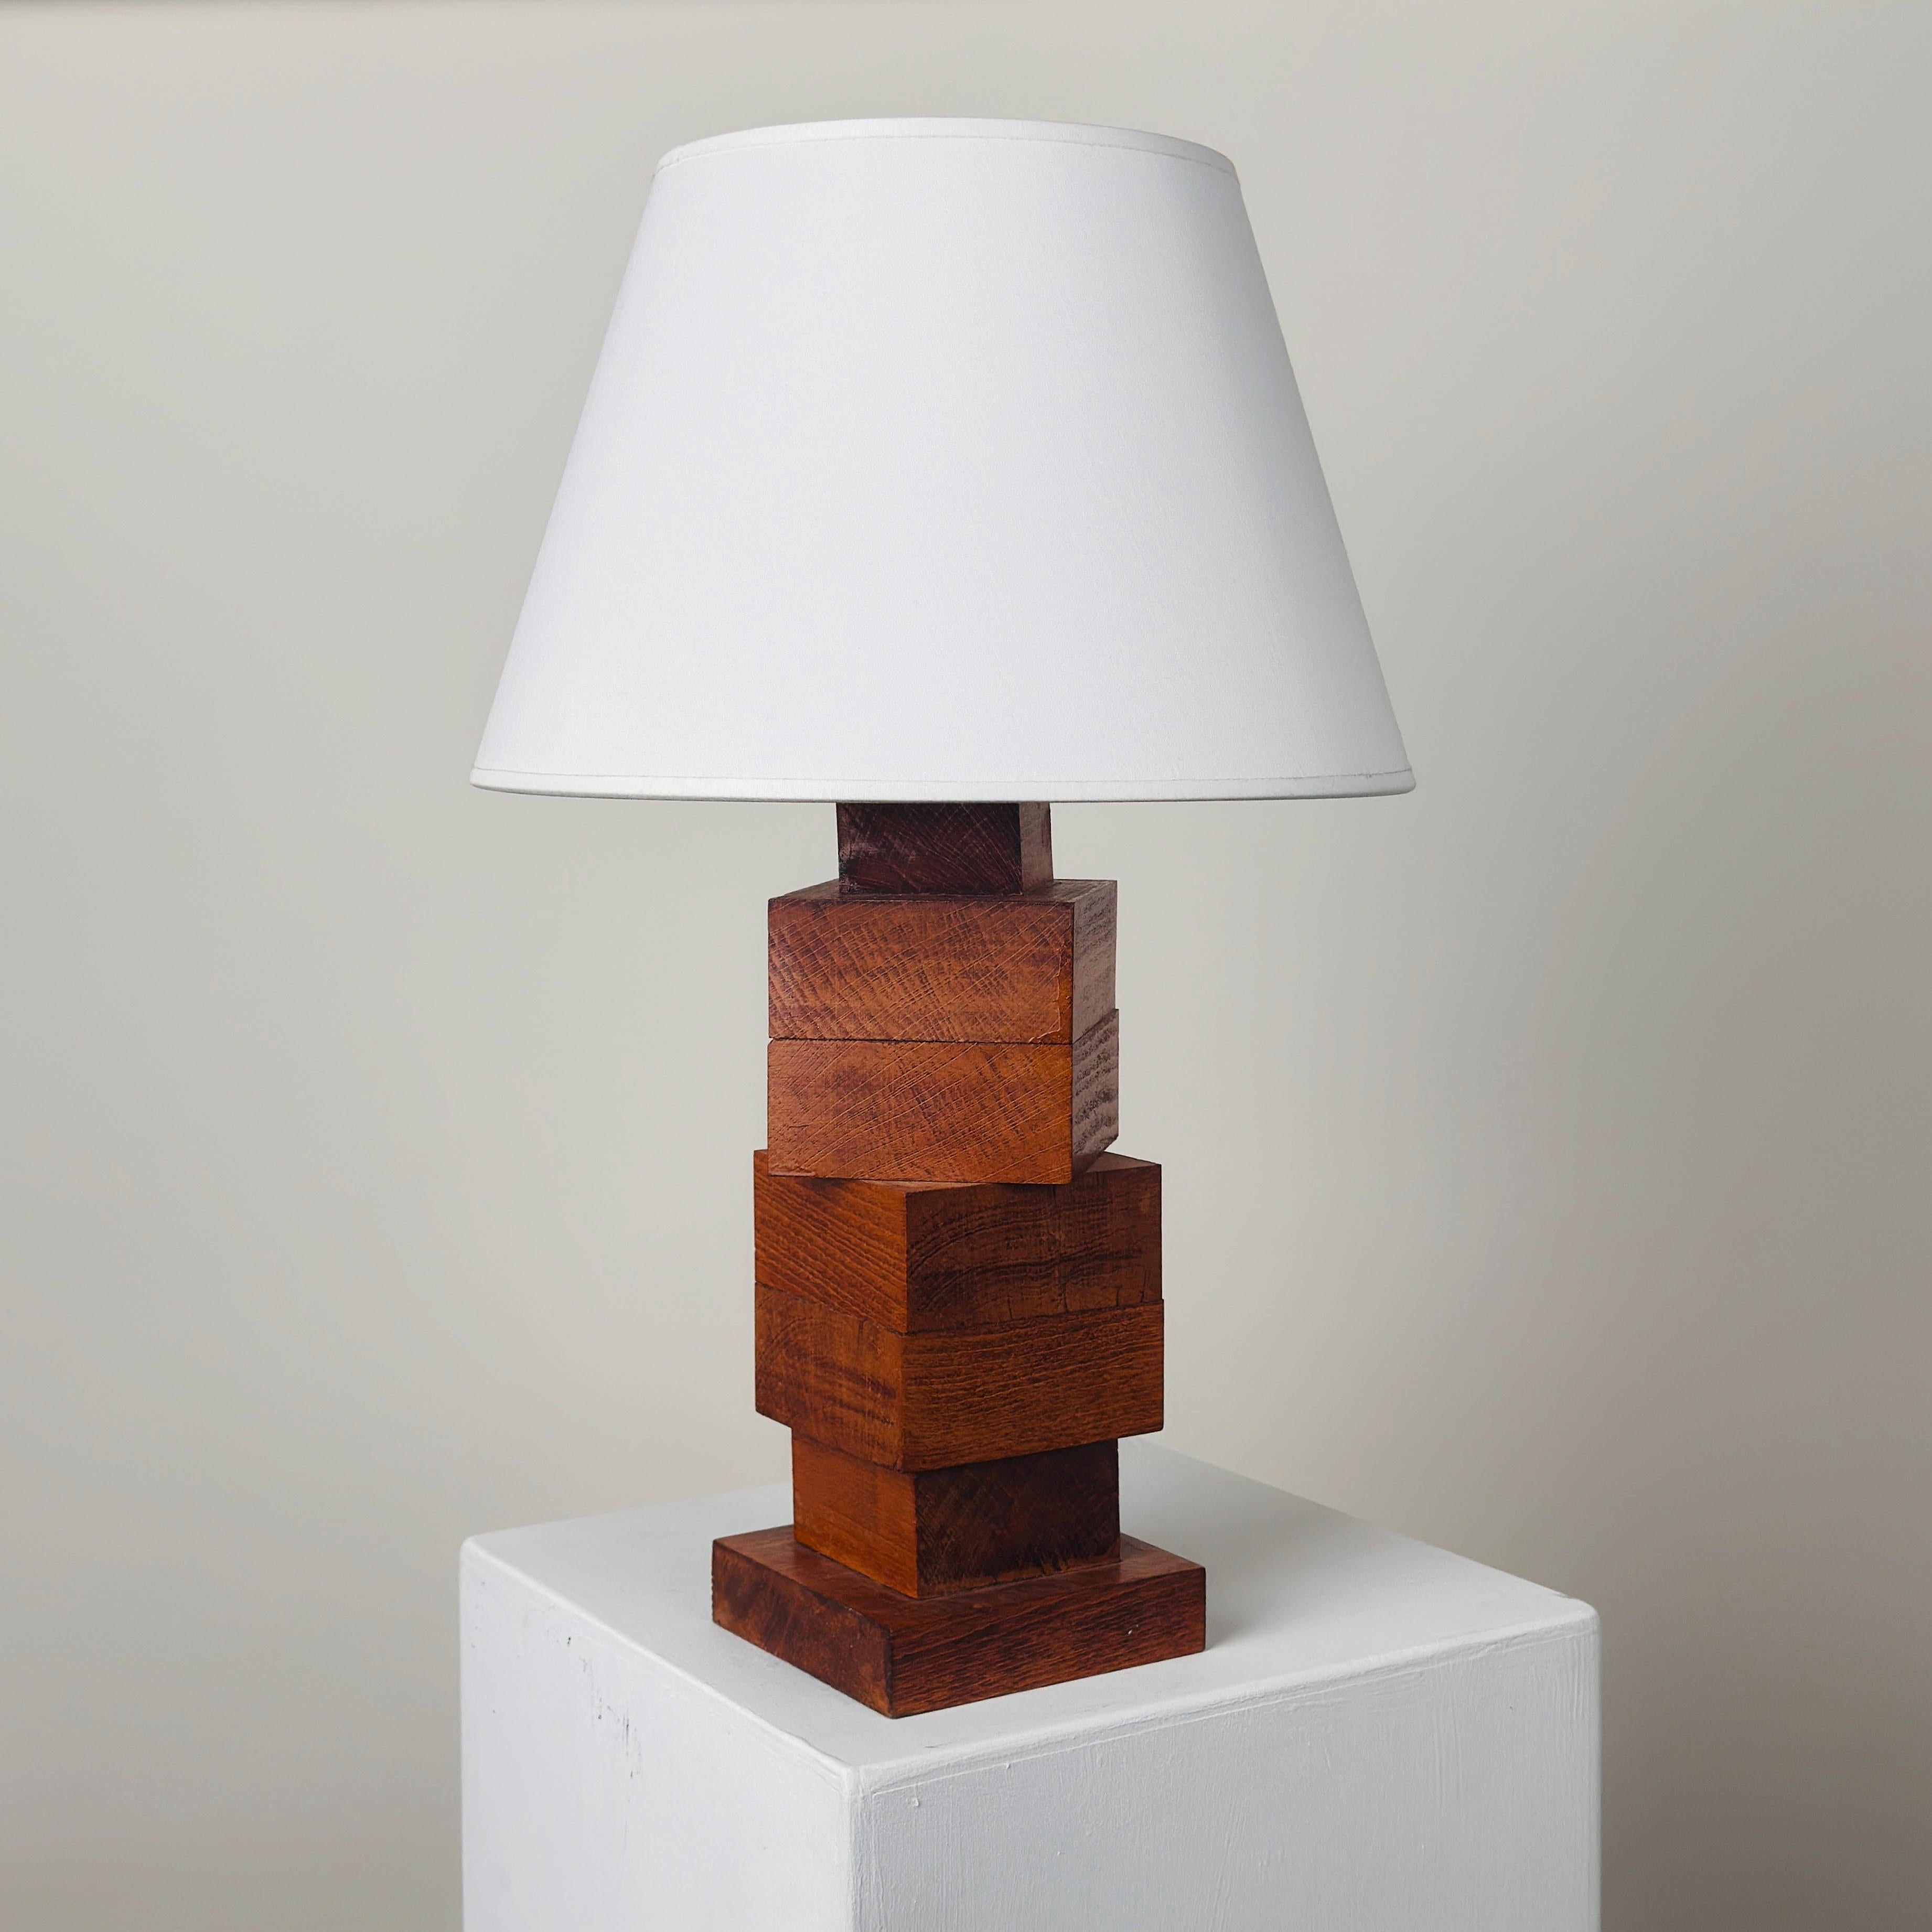 Prototype of an art-deco-style wooden lamp with adjustable body, circa 1930.

Good condition

H33cm without lamp shade. 